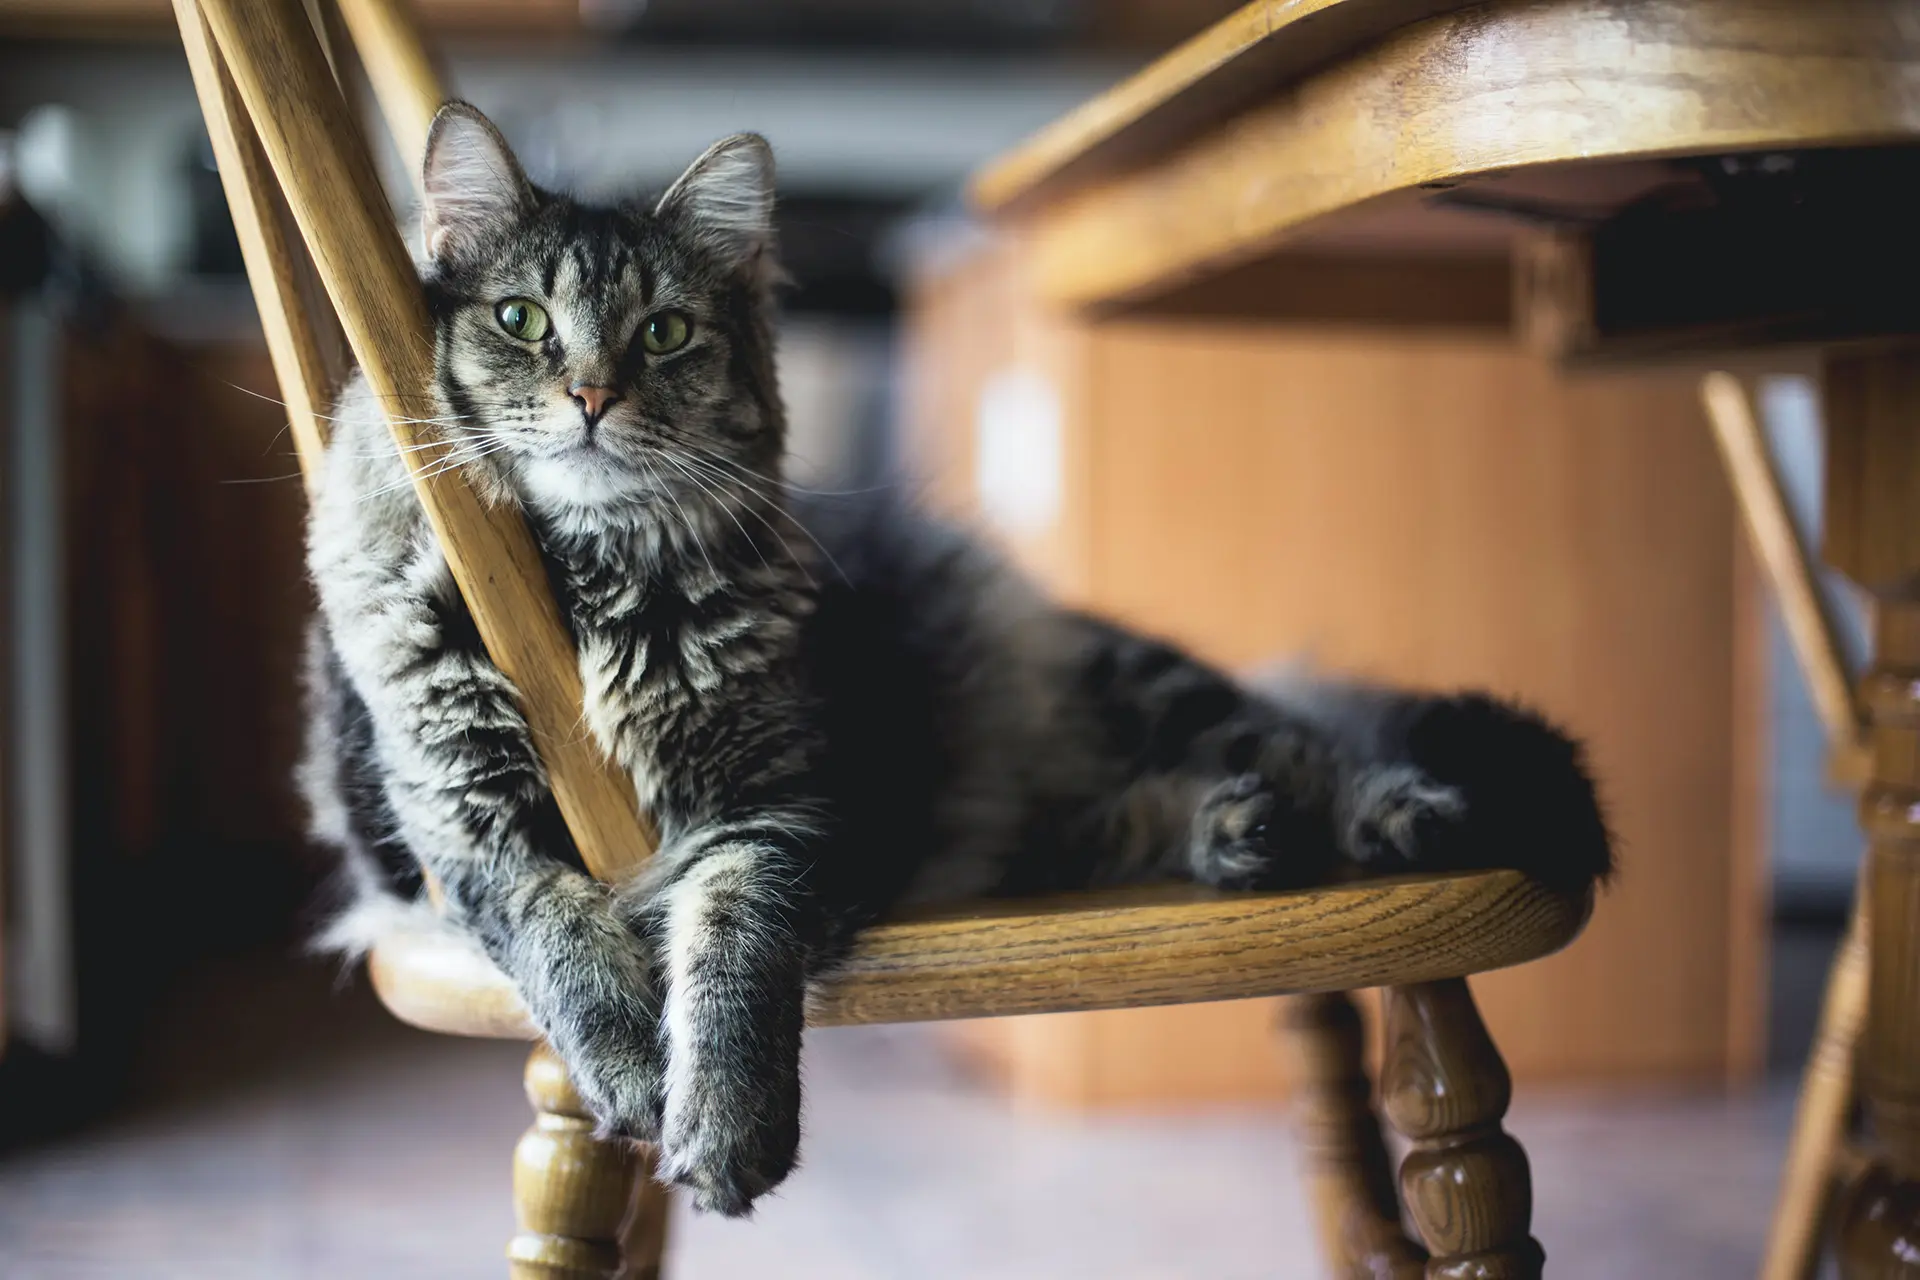 MainCoon cat sitting on a wooden dining chair